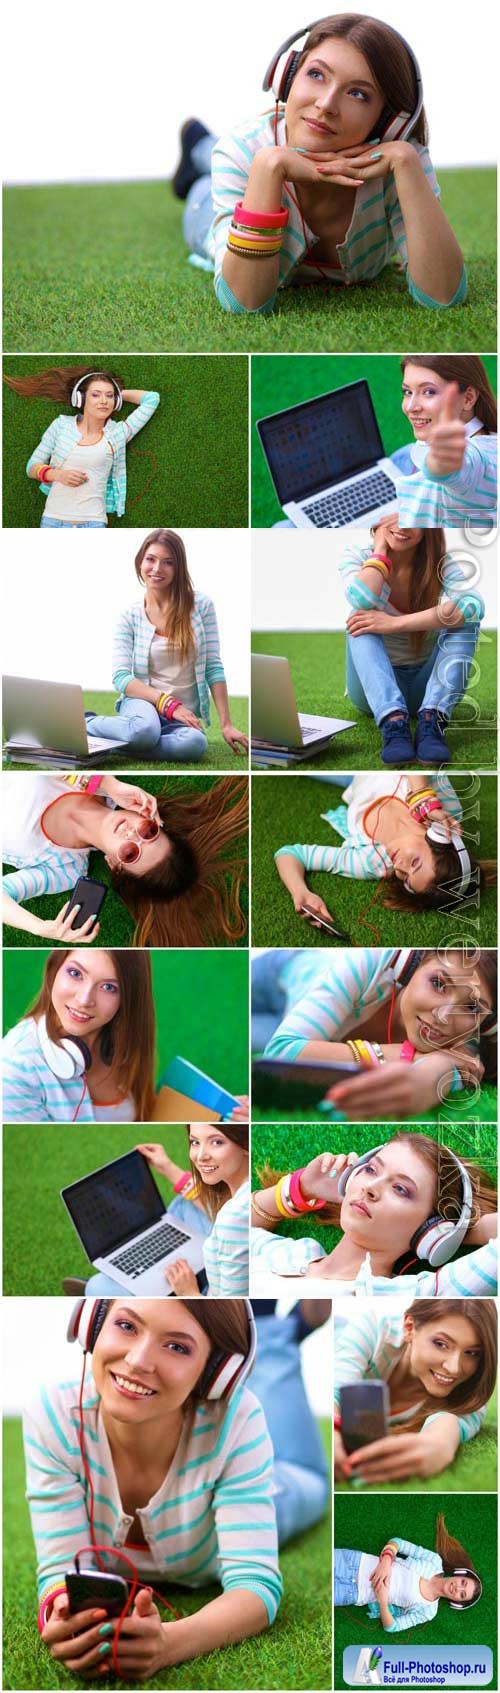 Girl with gadgets on green grass stock photo